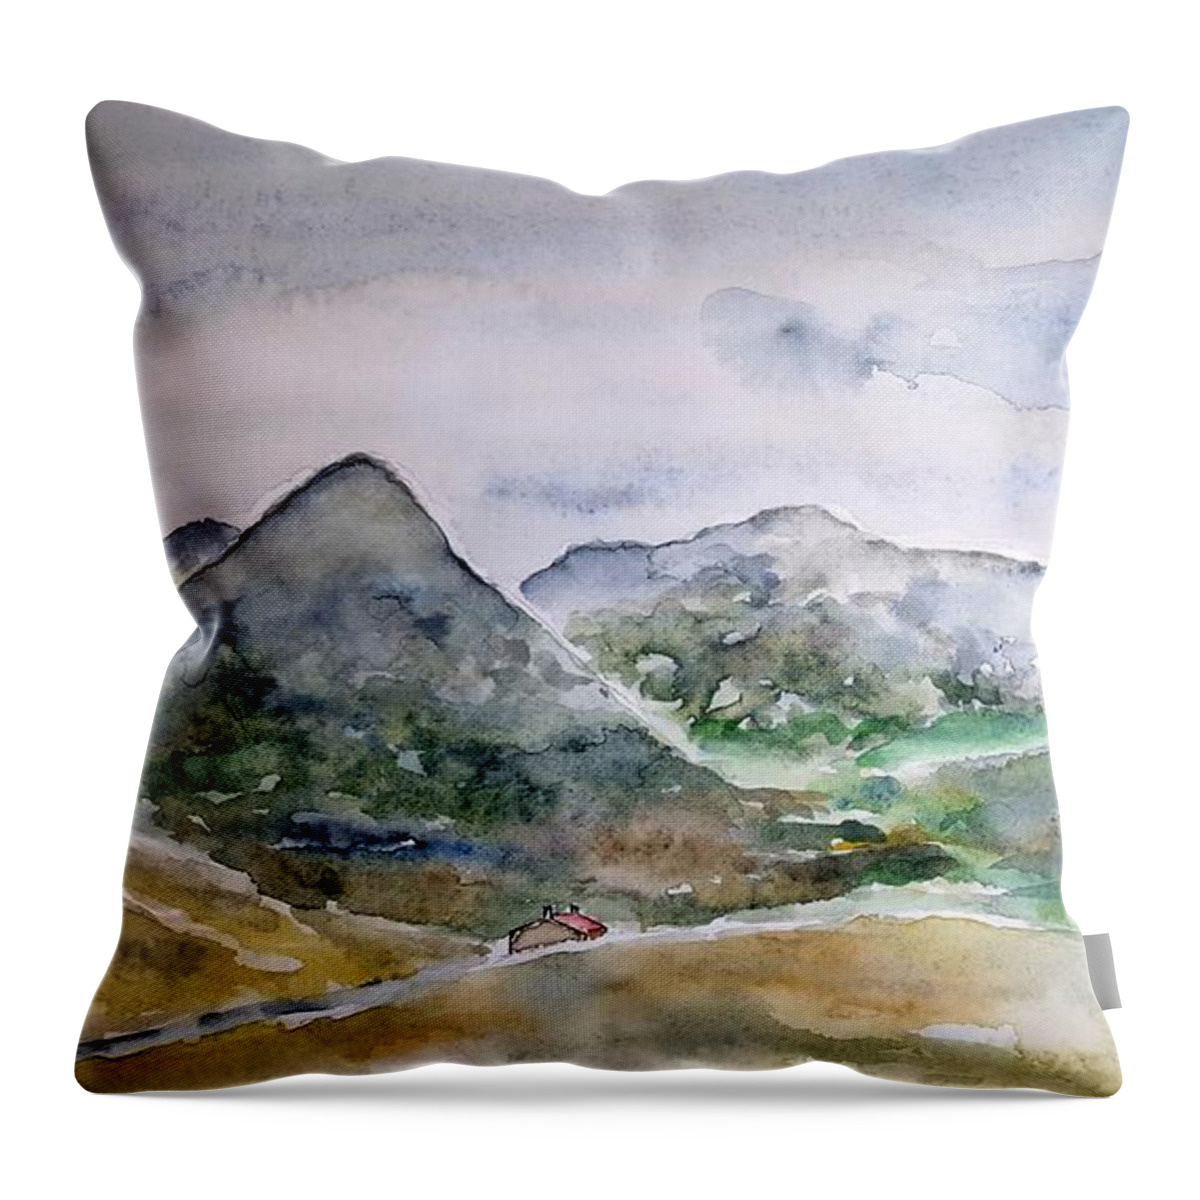 Watercolor Throw Pillow featuring the painting Skye Valley by John Klobucher